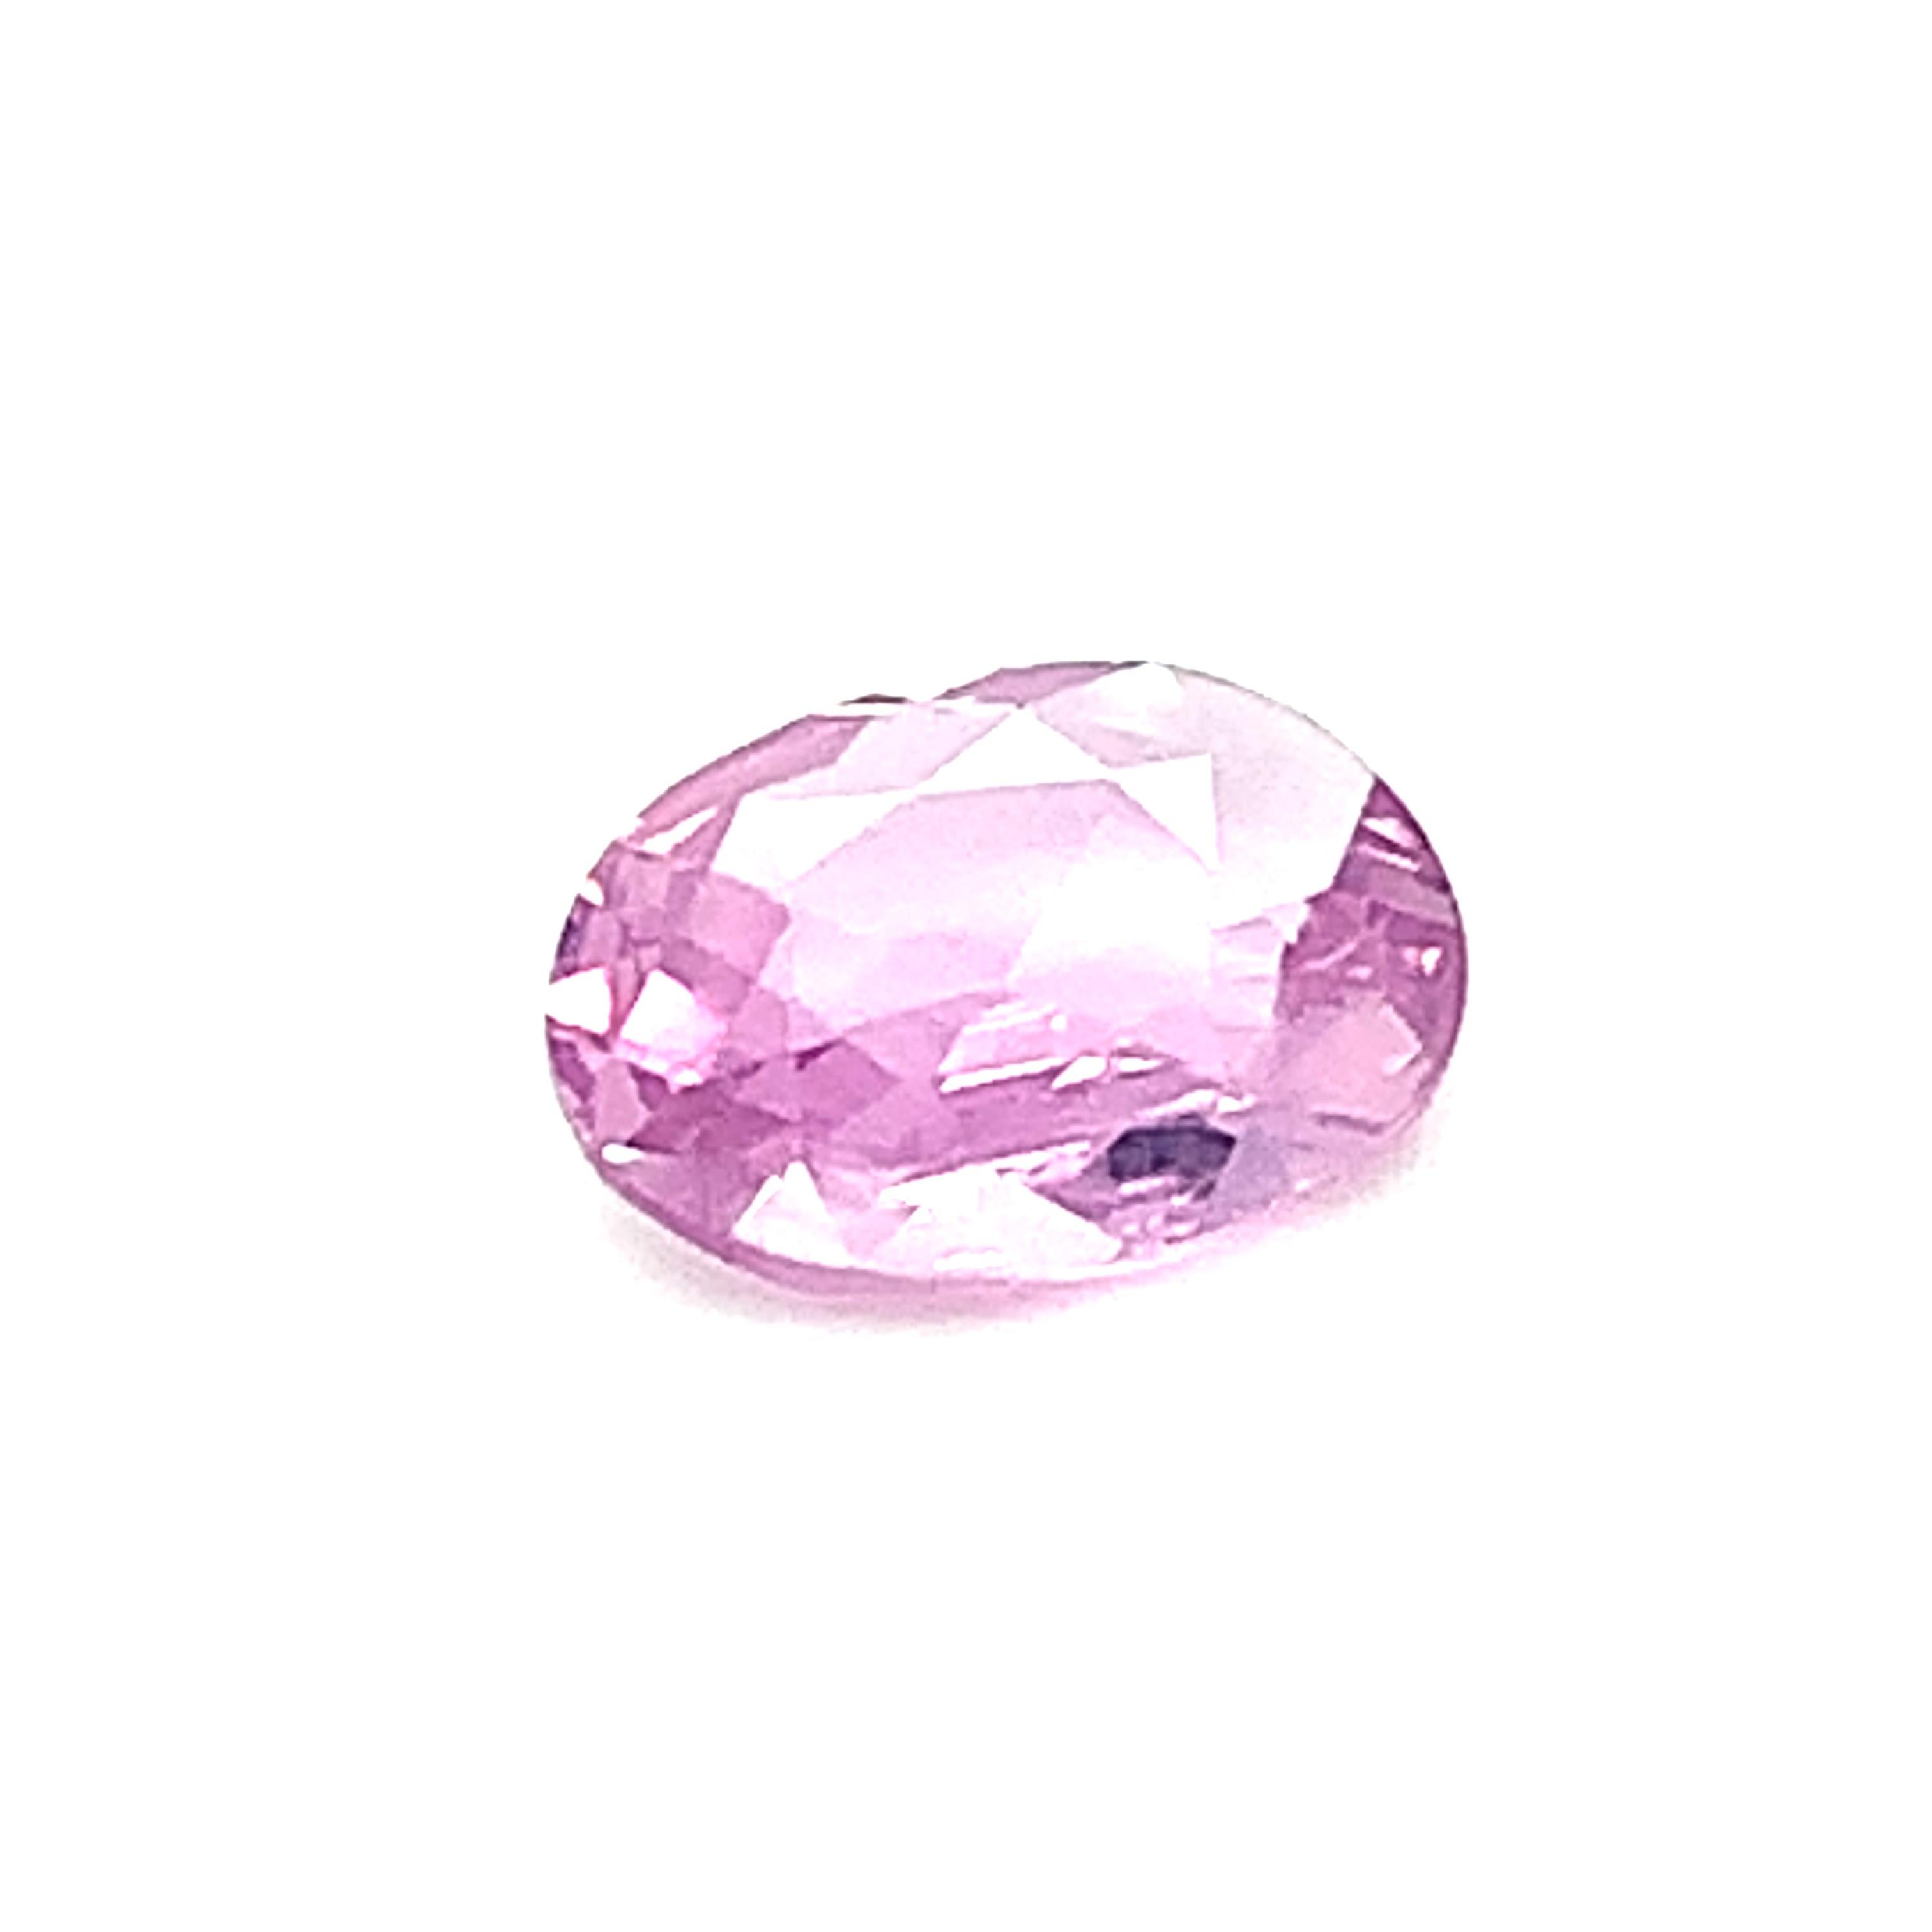 Oval Cut 2.95 Ct. Pink Sapphire Oval GIA, Unset 3-Stone Engagement Ring or Pendant Gem